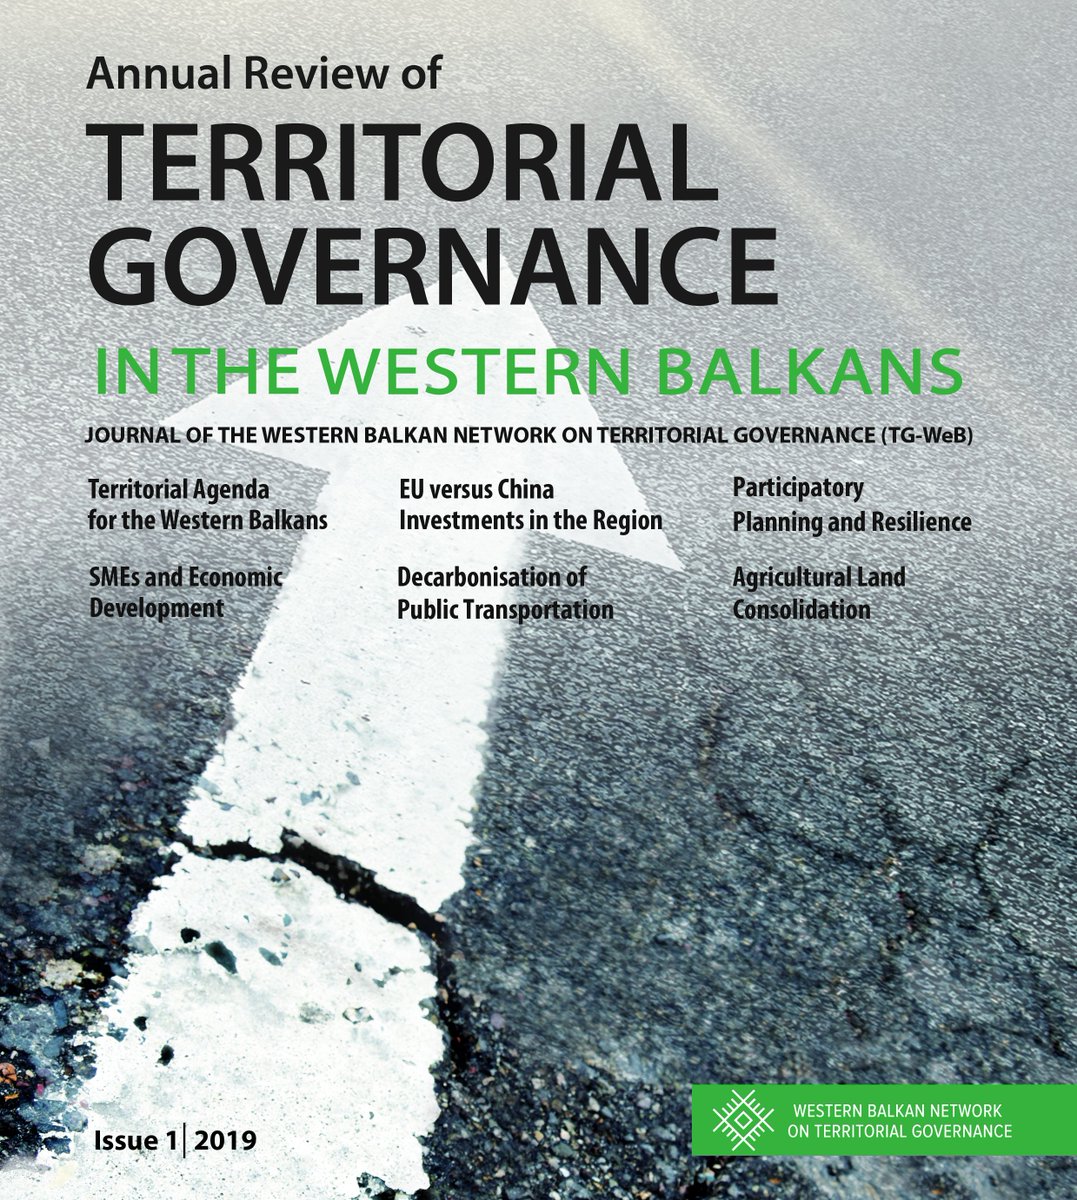 We have the pleasure to share with you the Journal of Western Balkan Network on Territorial Governance 
#periodical #policybrief #Europeanisation #research #developmentagenda #policyinfluencing
To read the full publication visit our website:
bit.ly/2Sdr93E